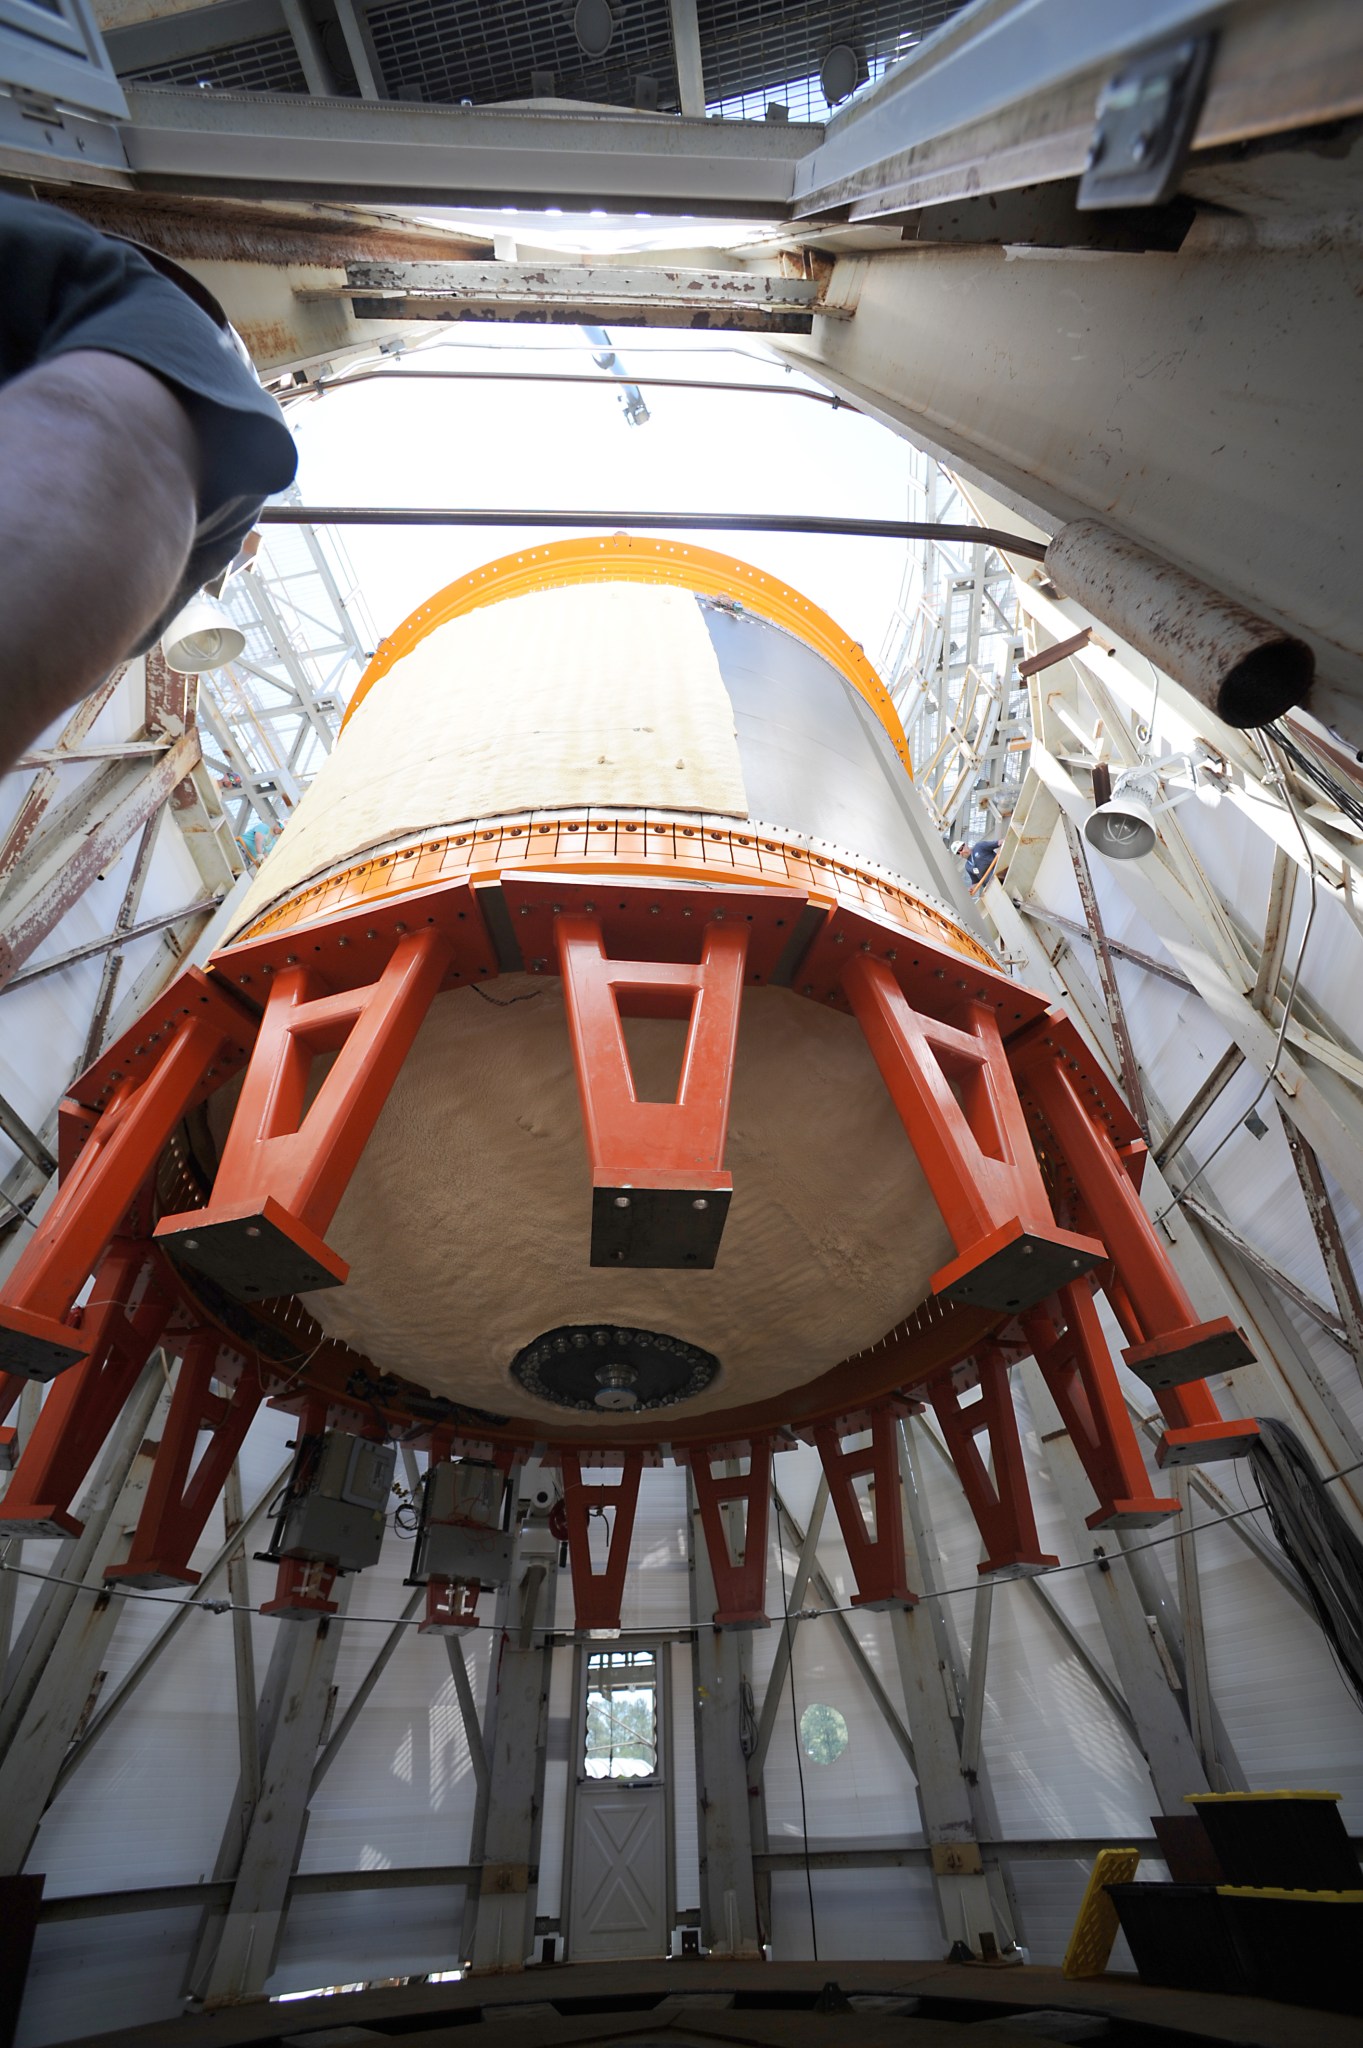 Last year, NASA engineers tested a full-scale composite cryogenic rocket fuel tank, shown here, in a test stand.